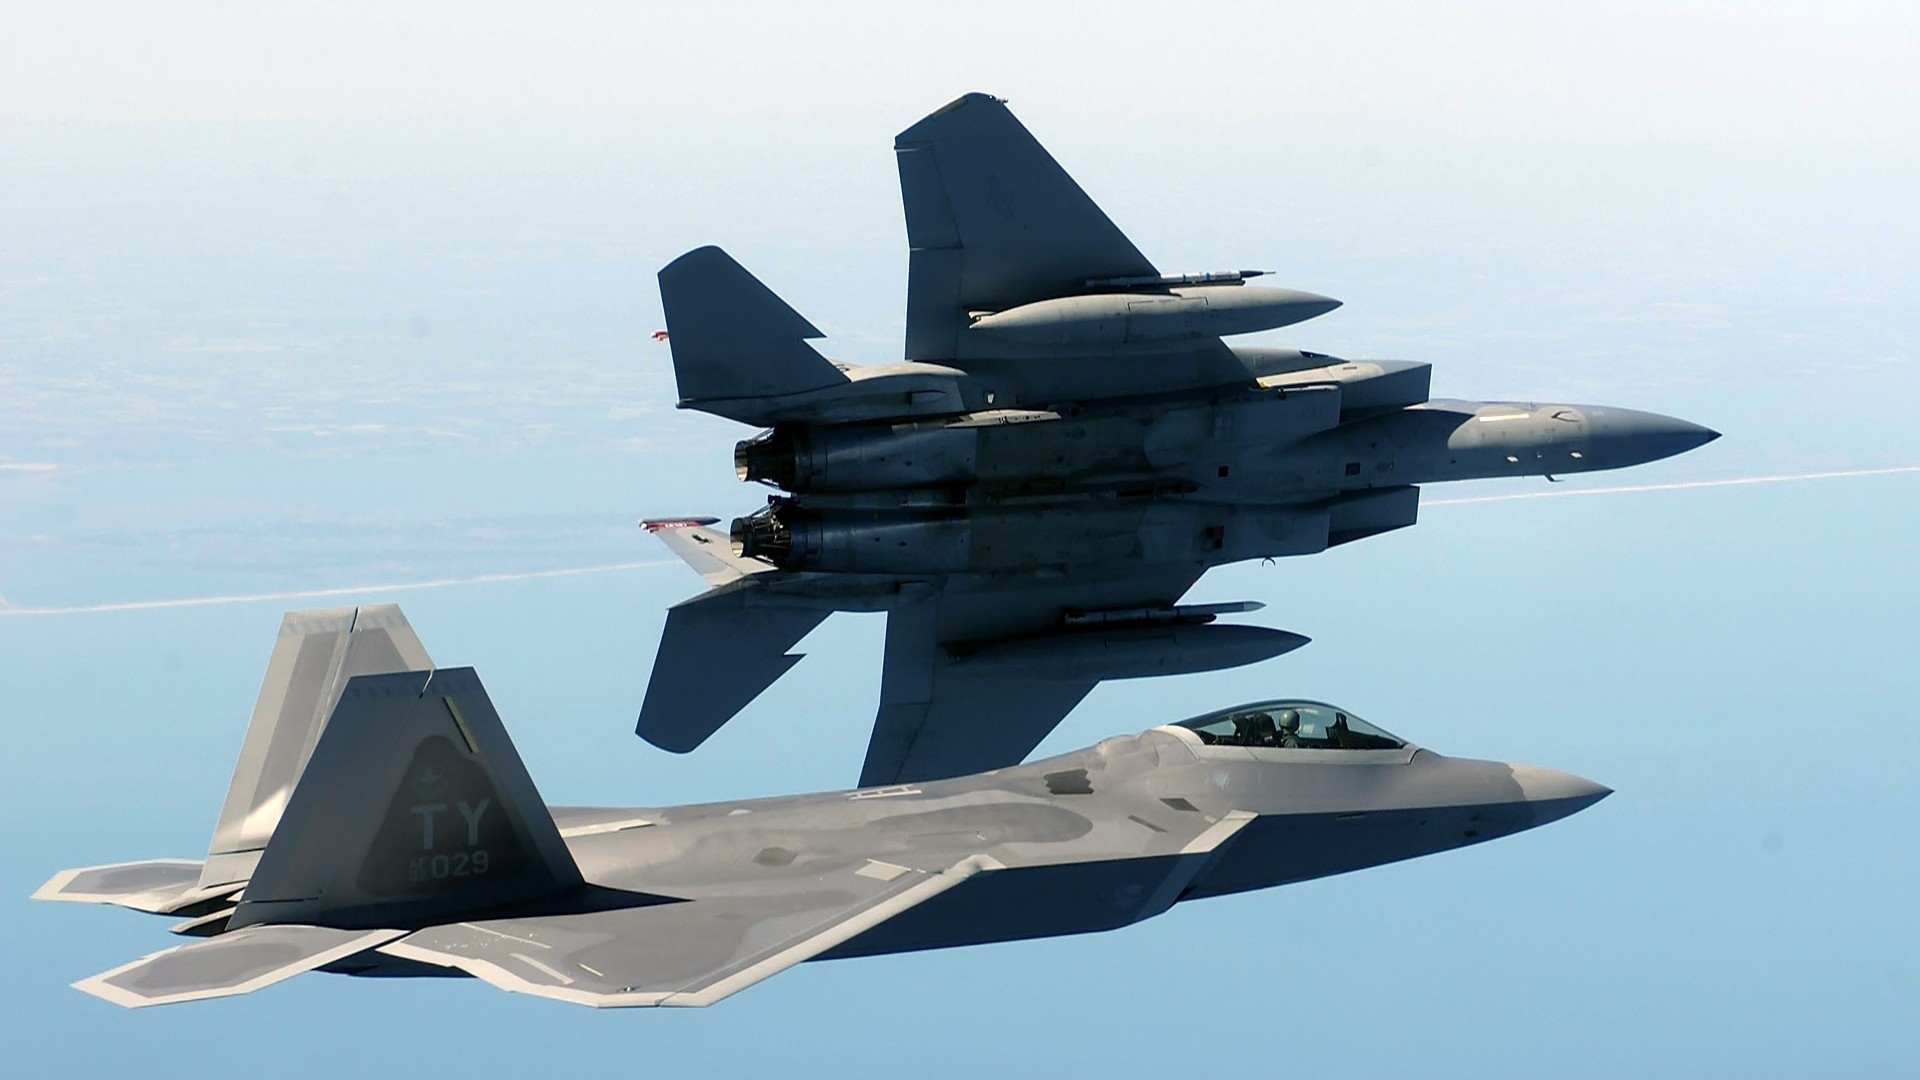 General 1920x1080 military aircraft airplane sky jets F-22 Raptor F-15 Eagle military aircraft military vehicle American aircraft vehicle pilot McDonnell Douglas Lockheed Martin flying side view bottom view